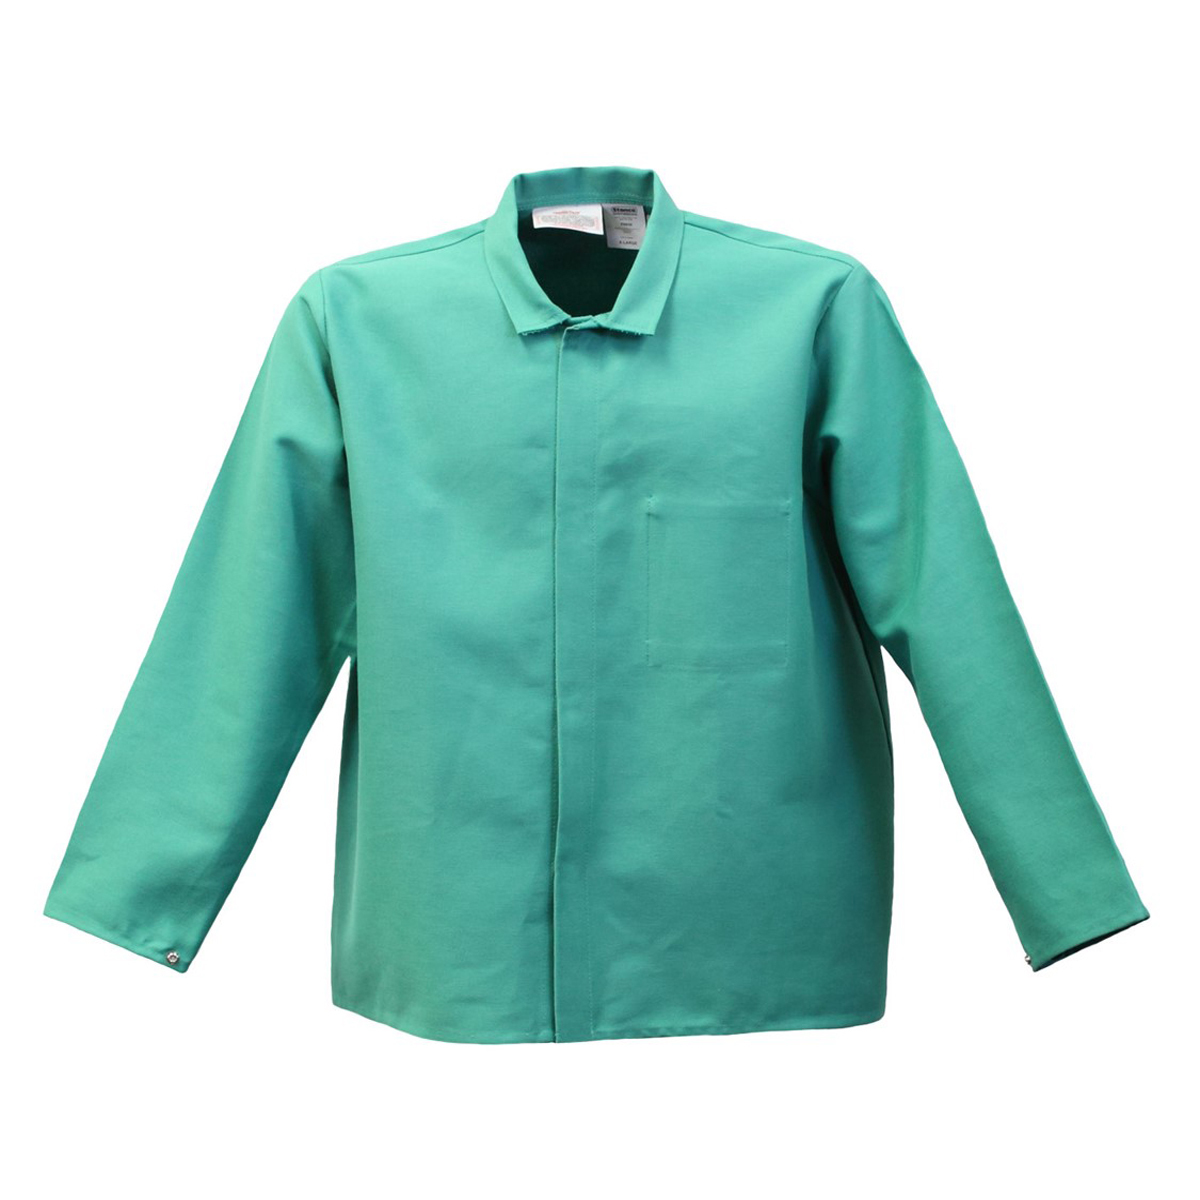 Stanco Safety Products™ Medium Green Cotton Flame Resistant Welding Jacket With Hook And Loop Closure And 2